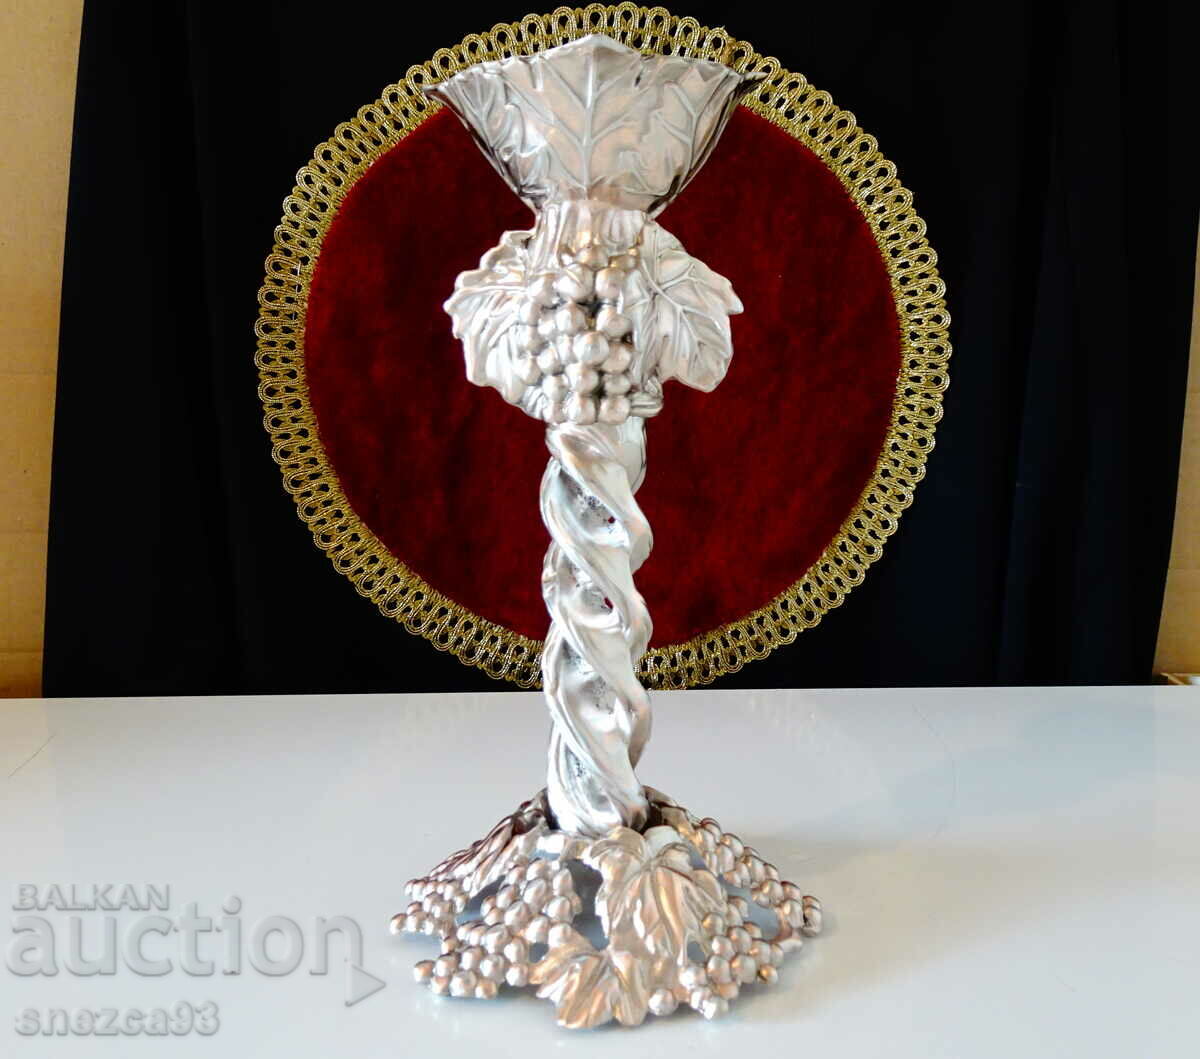 Silver-plated candlestick, vines, grapes, 880g.